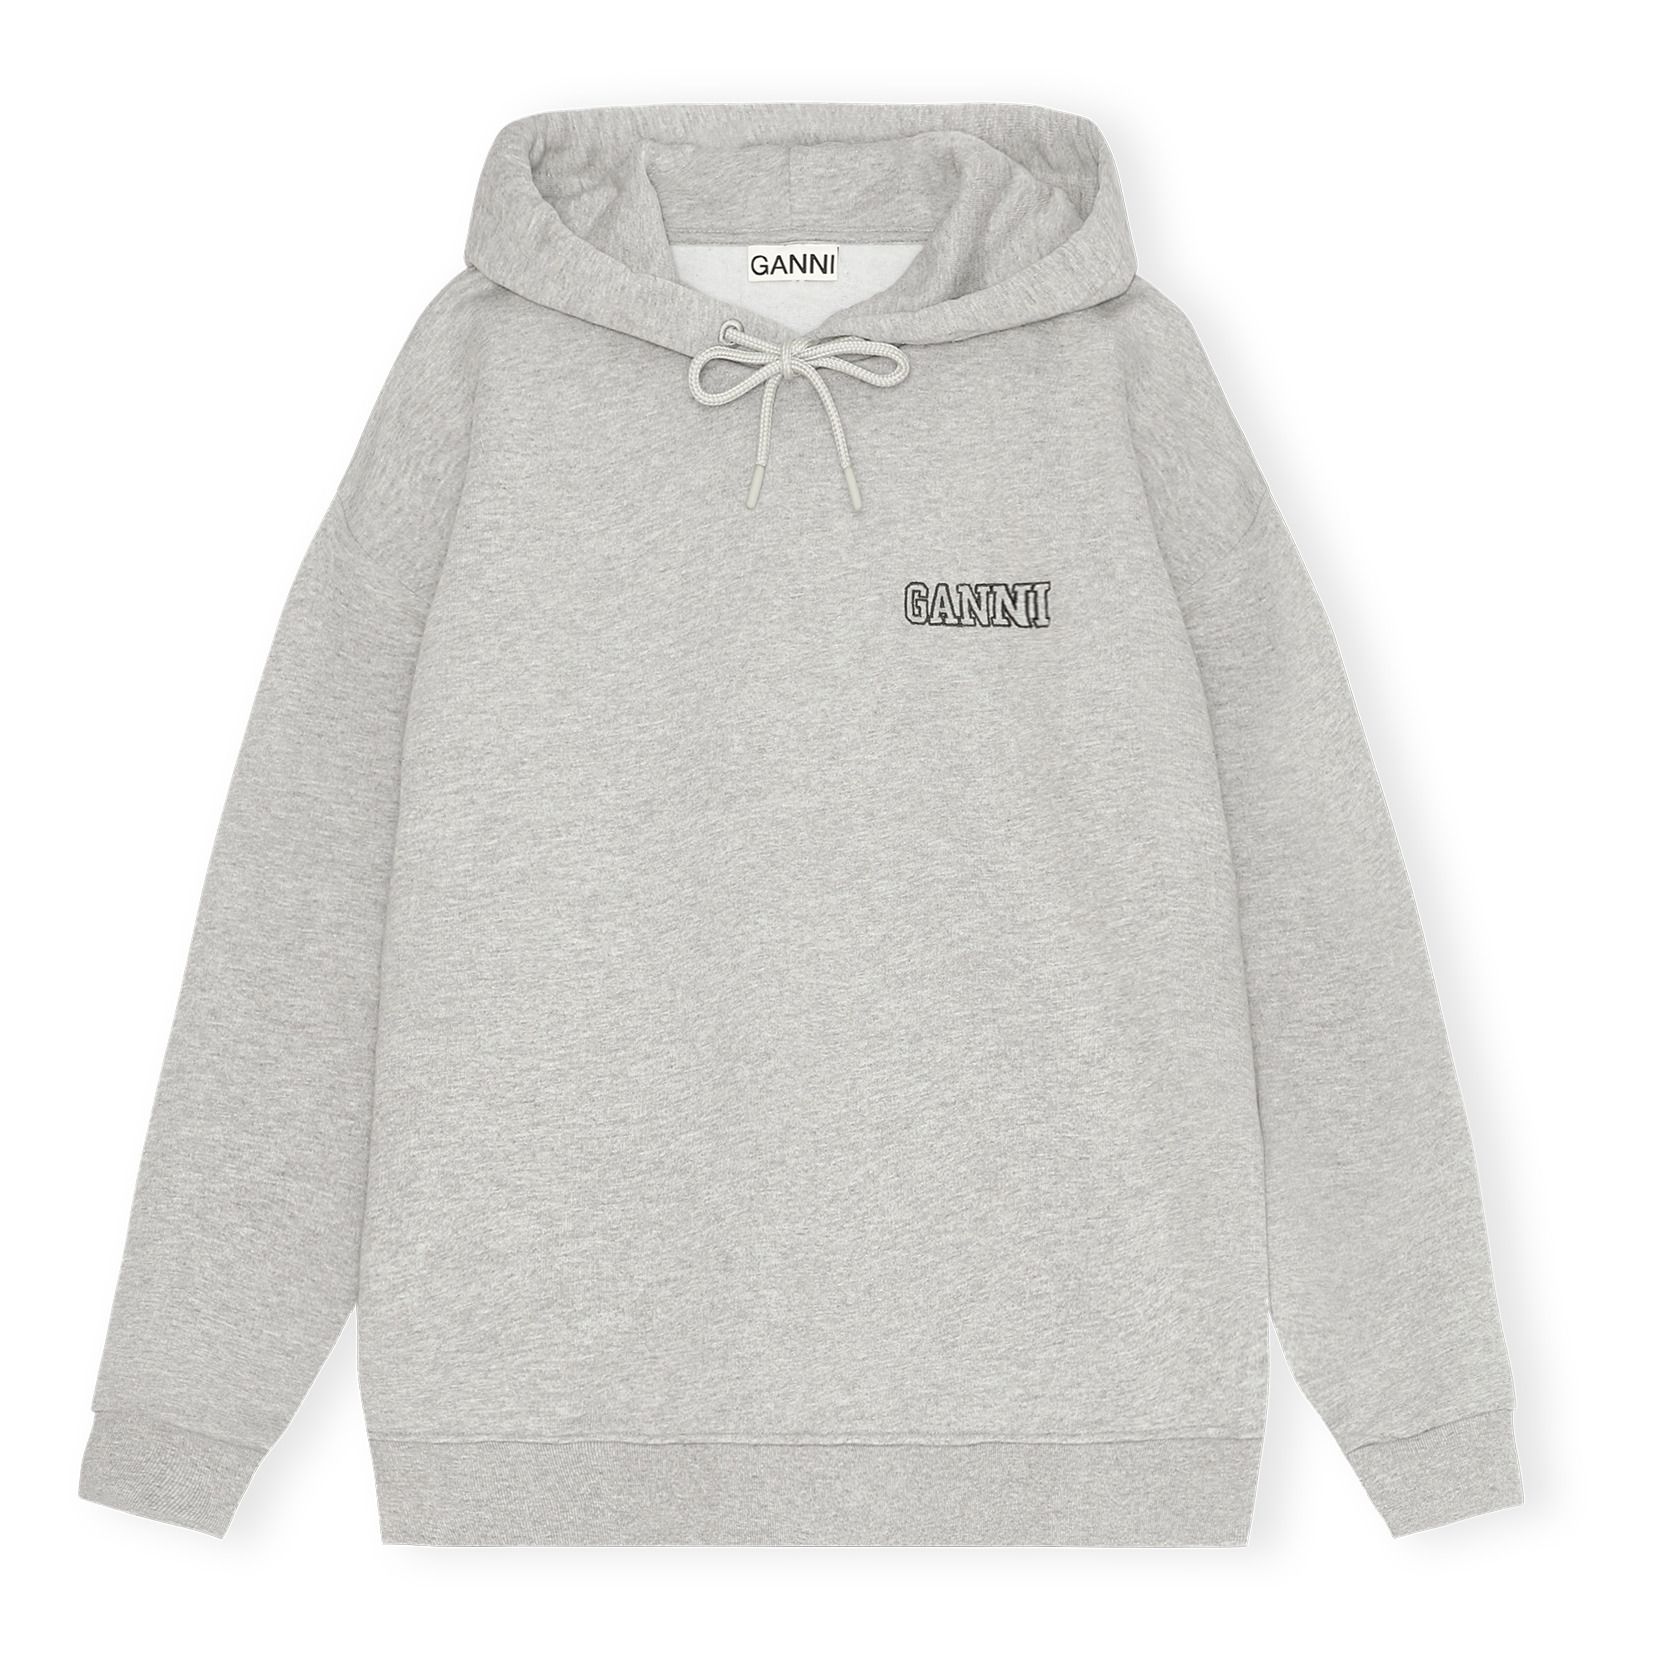 Ganni - Sweat Hoodie Isoli Software Coton Bio - Gris chiné | Smallable